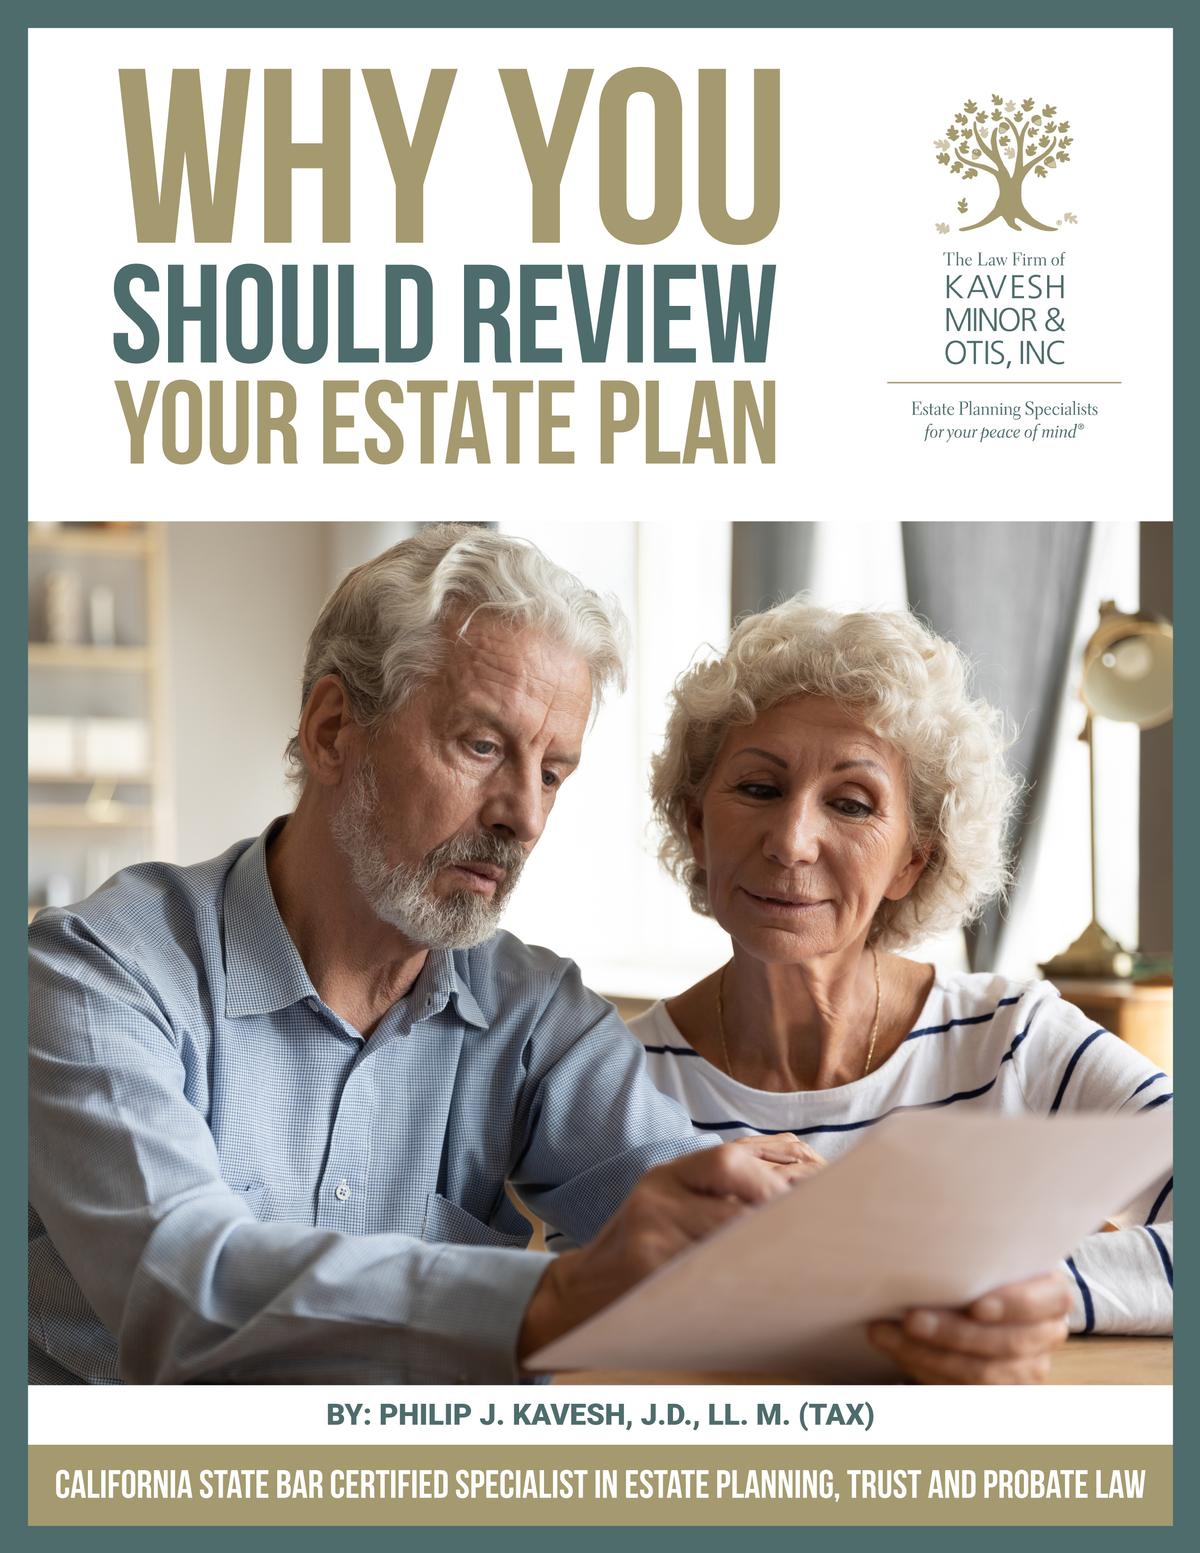 Why You Should Review Your Estate Plan